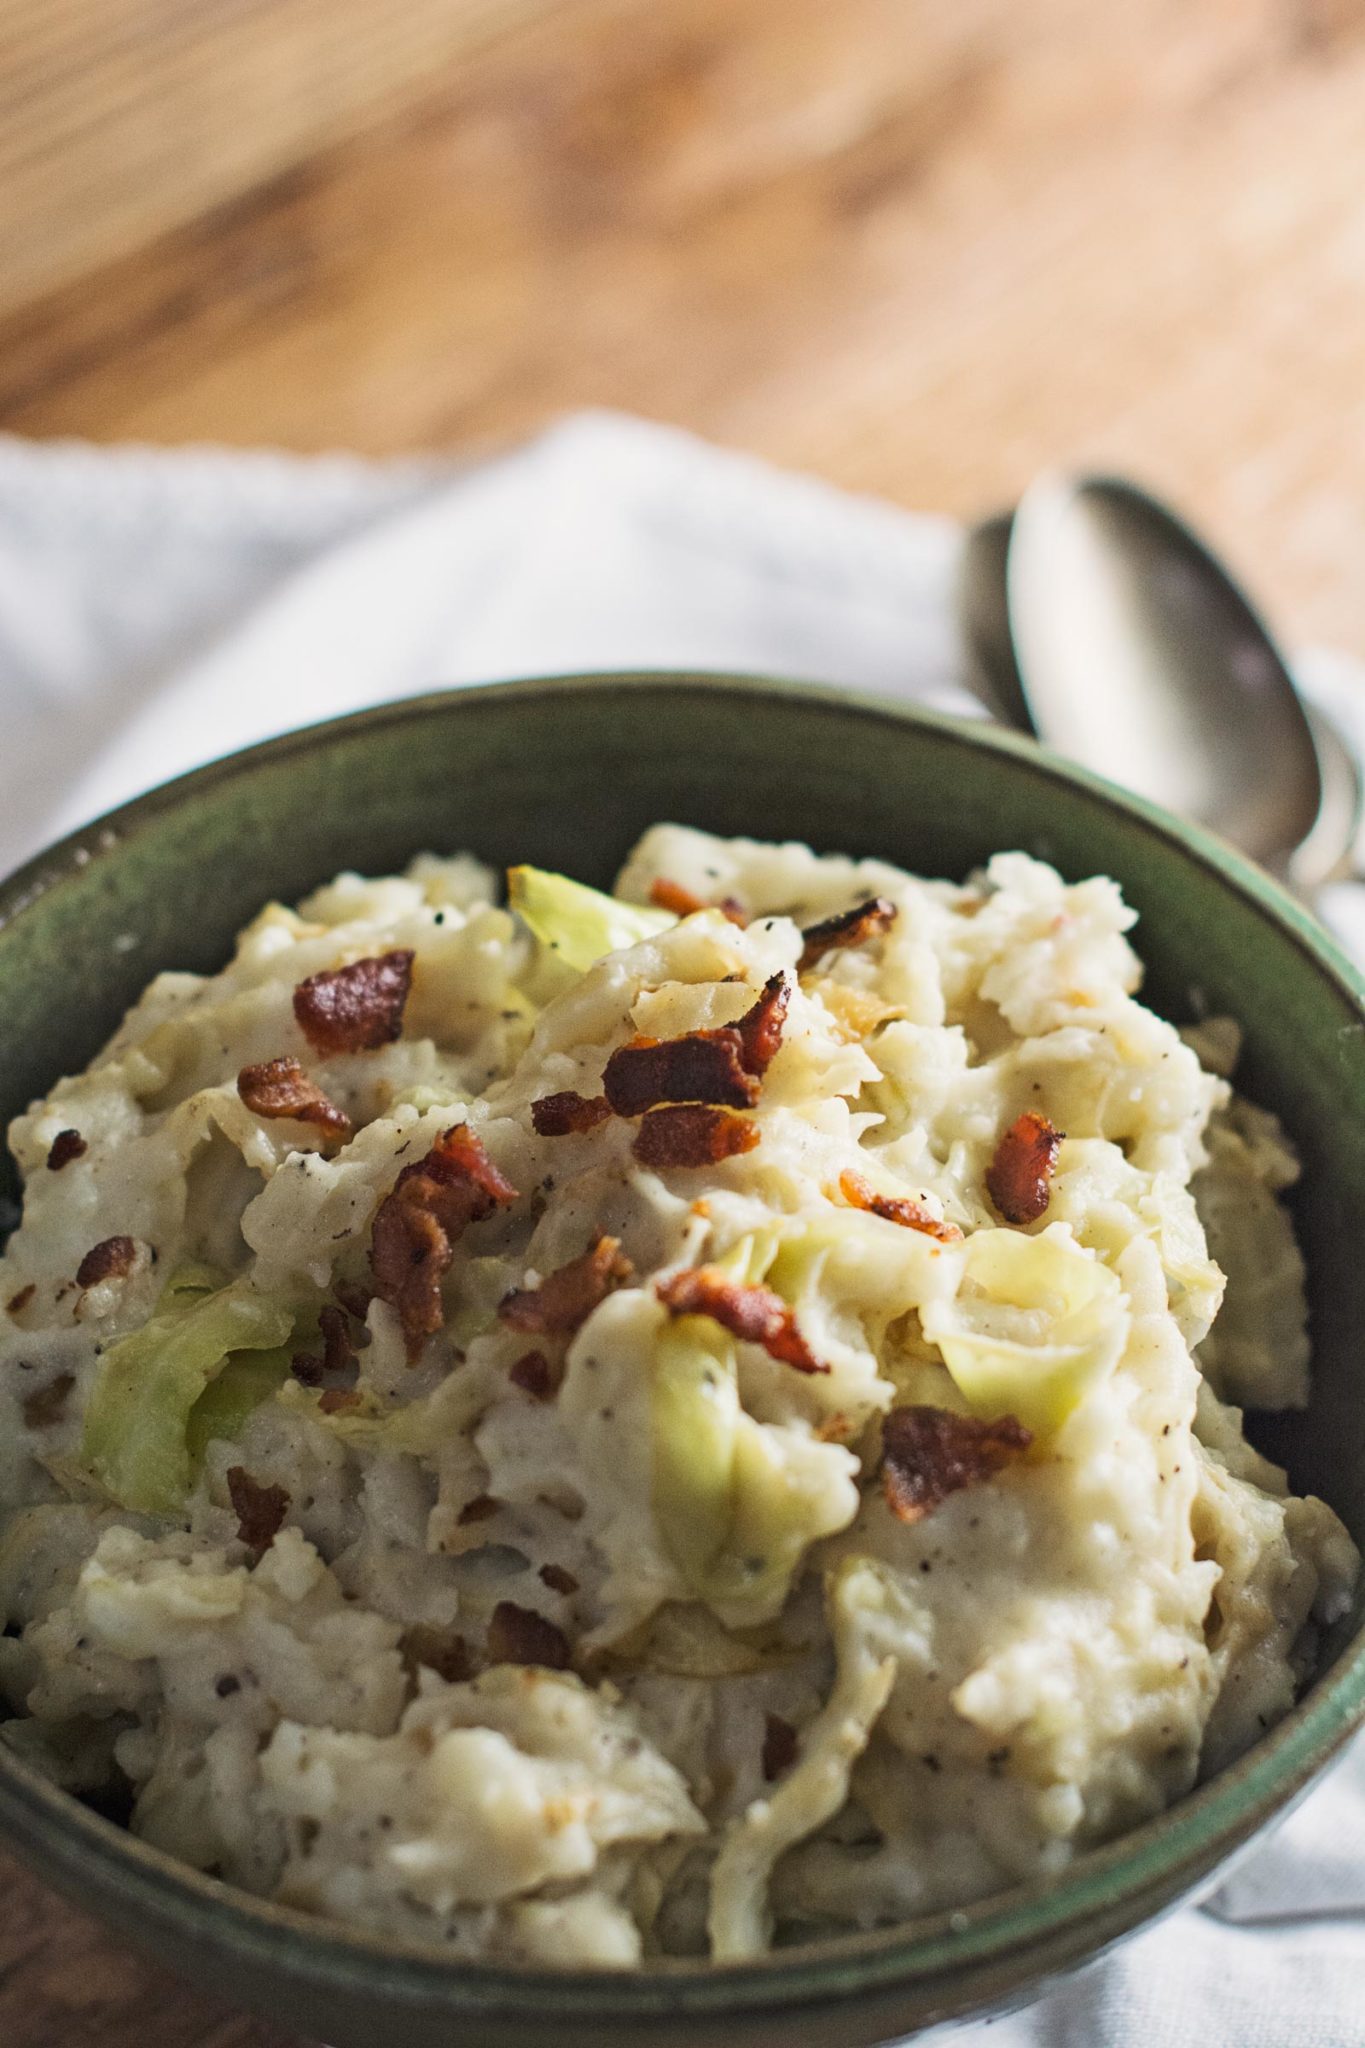 Try this take on the traditional Irish comfort food, Colcannon! Recipe @LittleFiggyFood